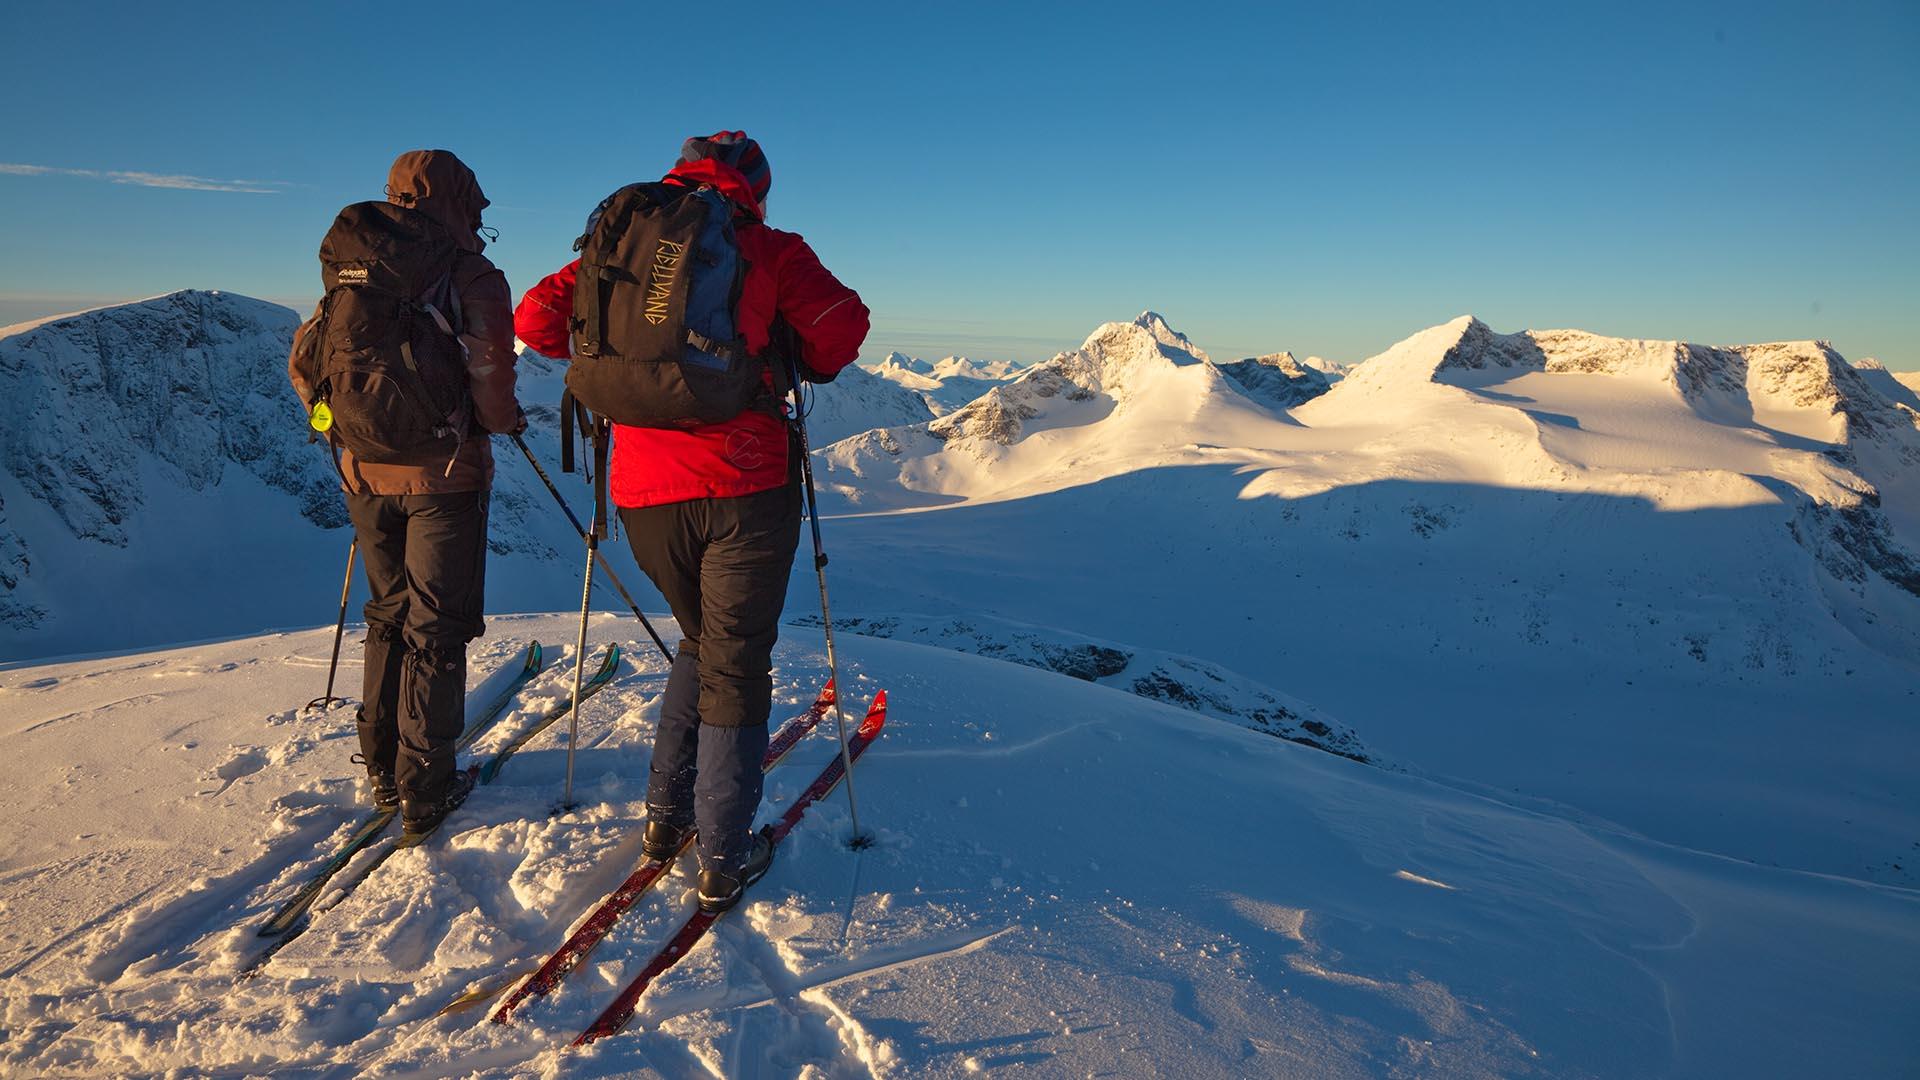 Two persons on skis taking a breather on a mountain top looking towards a snow covered mountain landscare a wintersday with no clouds.